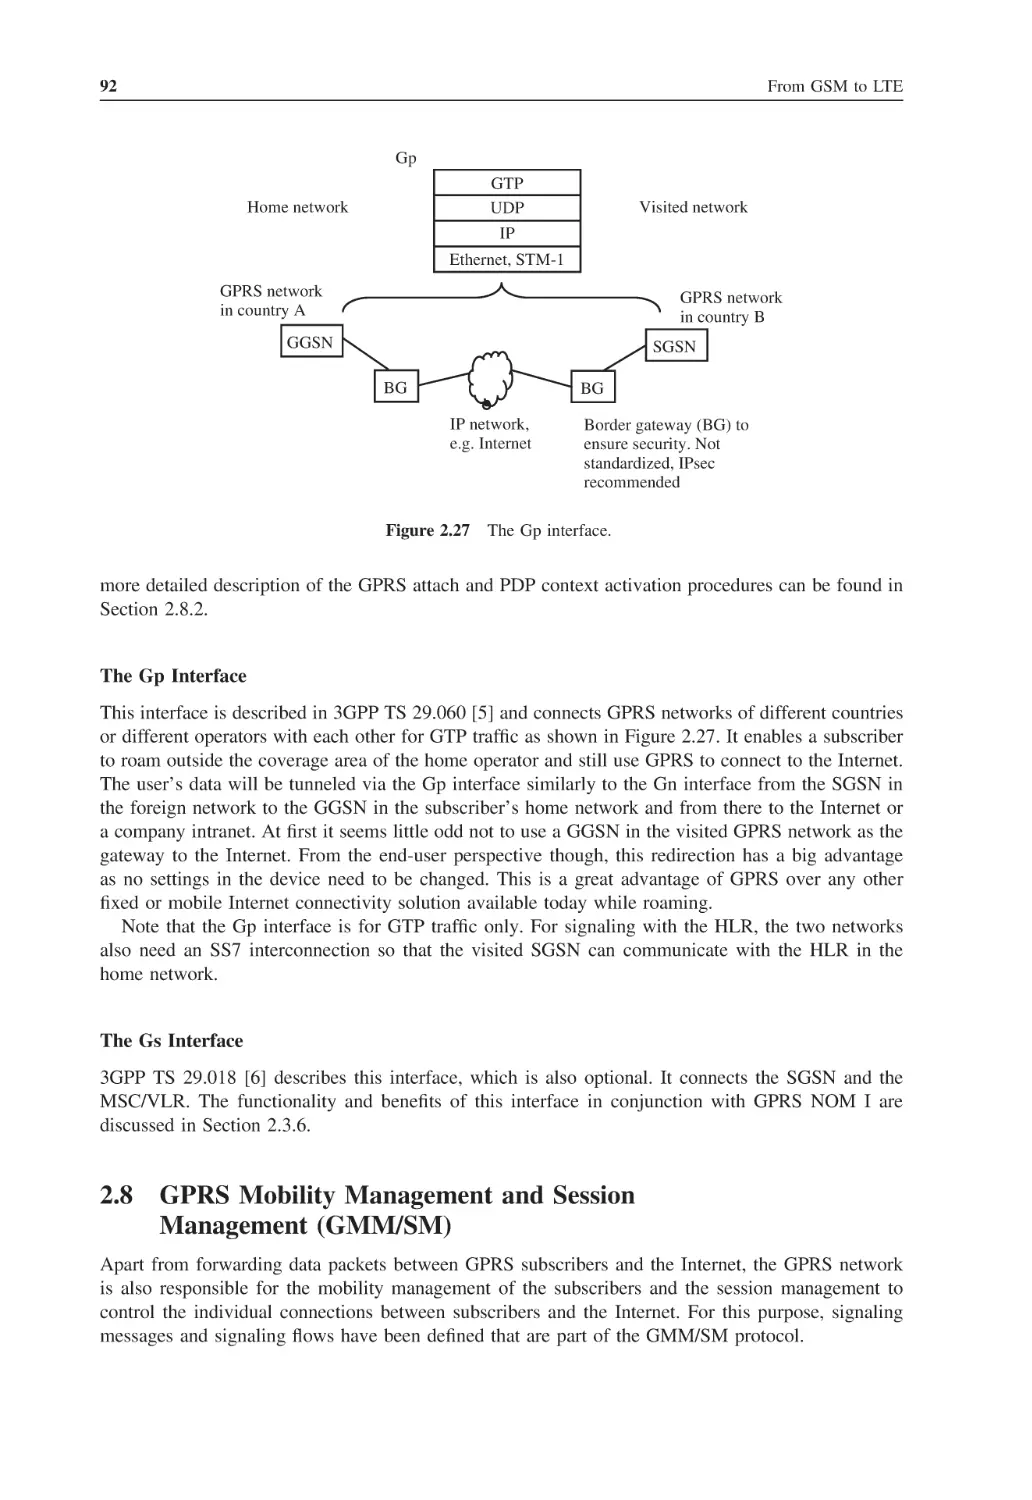 2.8 GPRS Mobility Management and Session Management (GMM/SM)